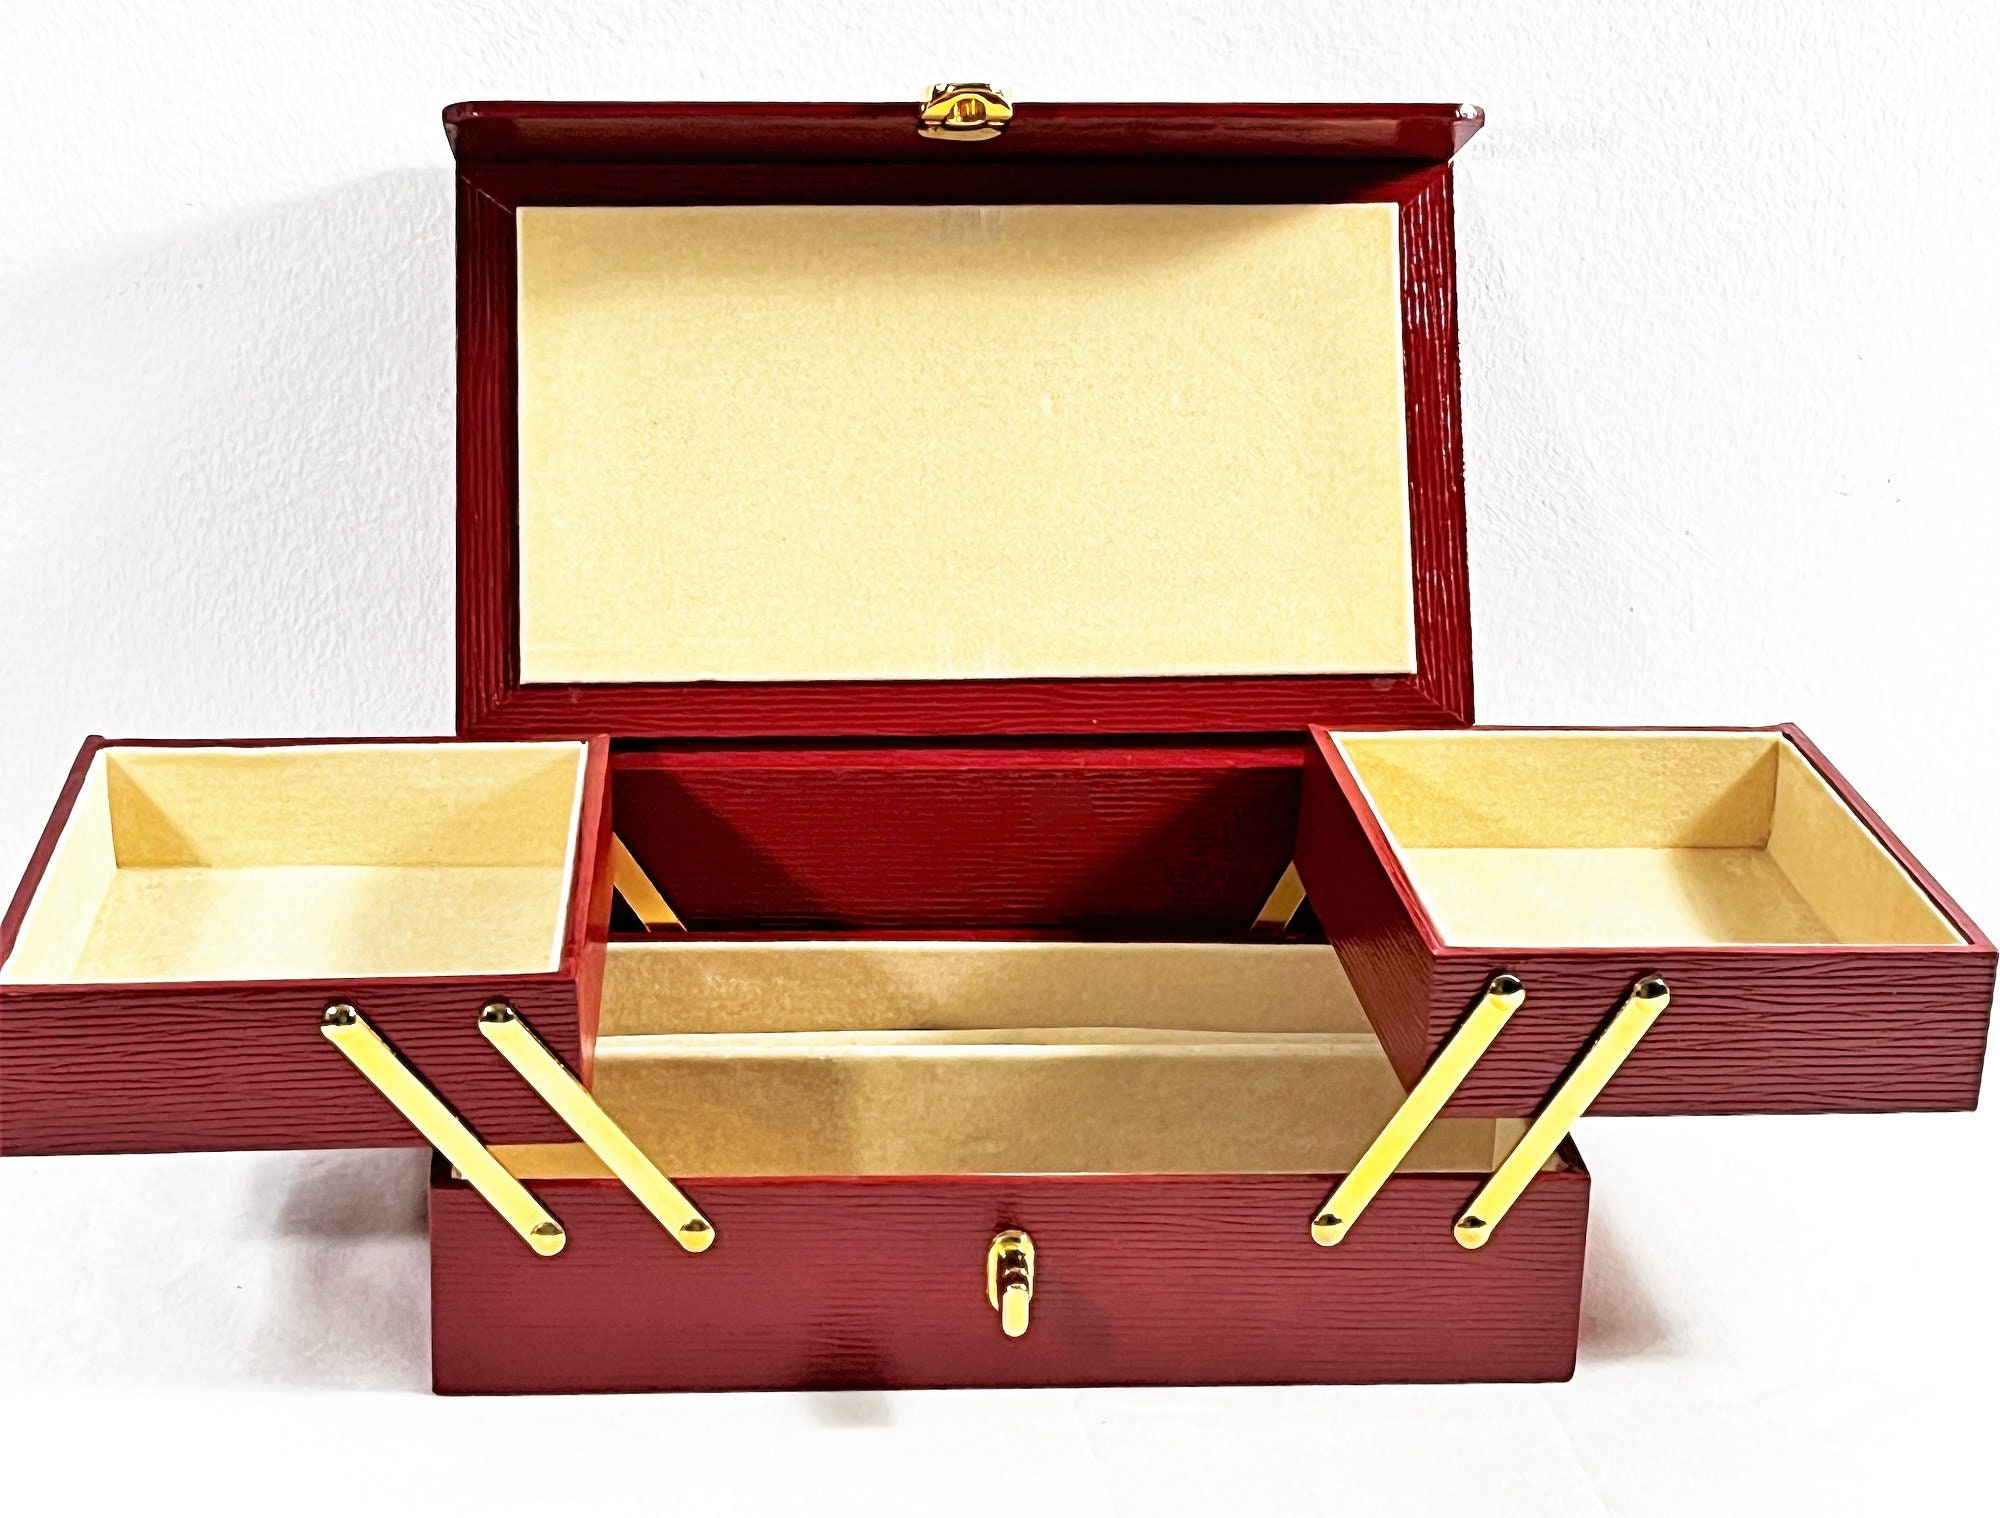 Cased Wood Red Leatherette Travel Jewelry Box, Hinged Slide Up Trays, Rings  & Earrings Section, Lock, 8 W. 5 L. 3 T. Free US Shipping